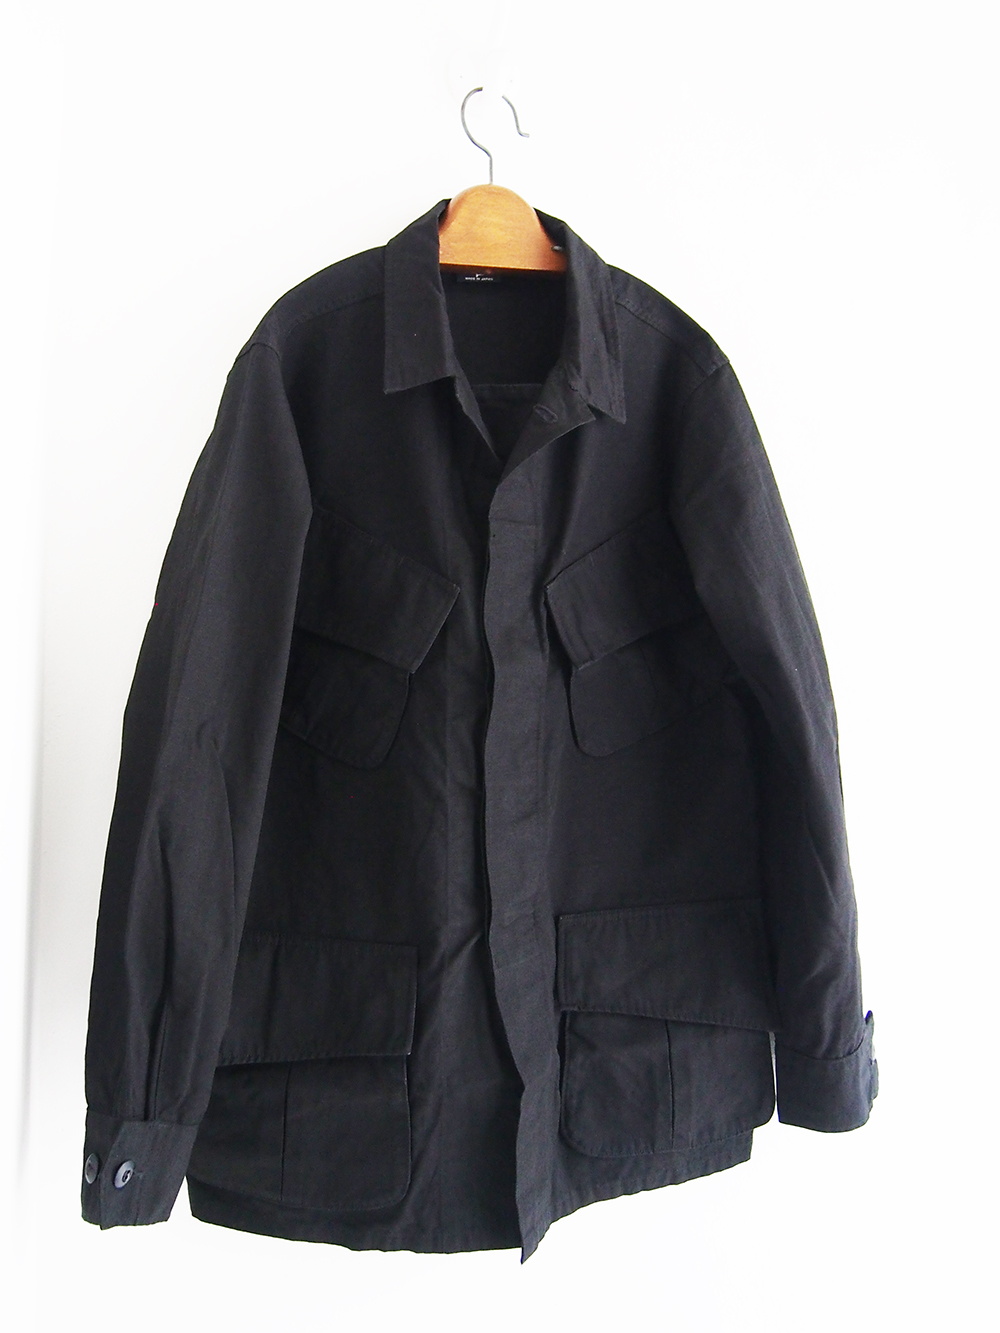 orSlow _ Us Army Tropical Jacket / Rip Stop Black-2 | R1